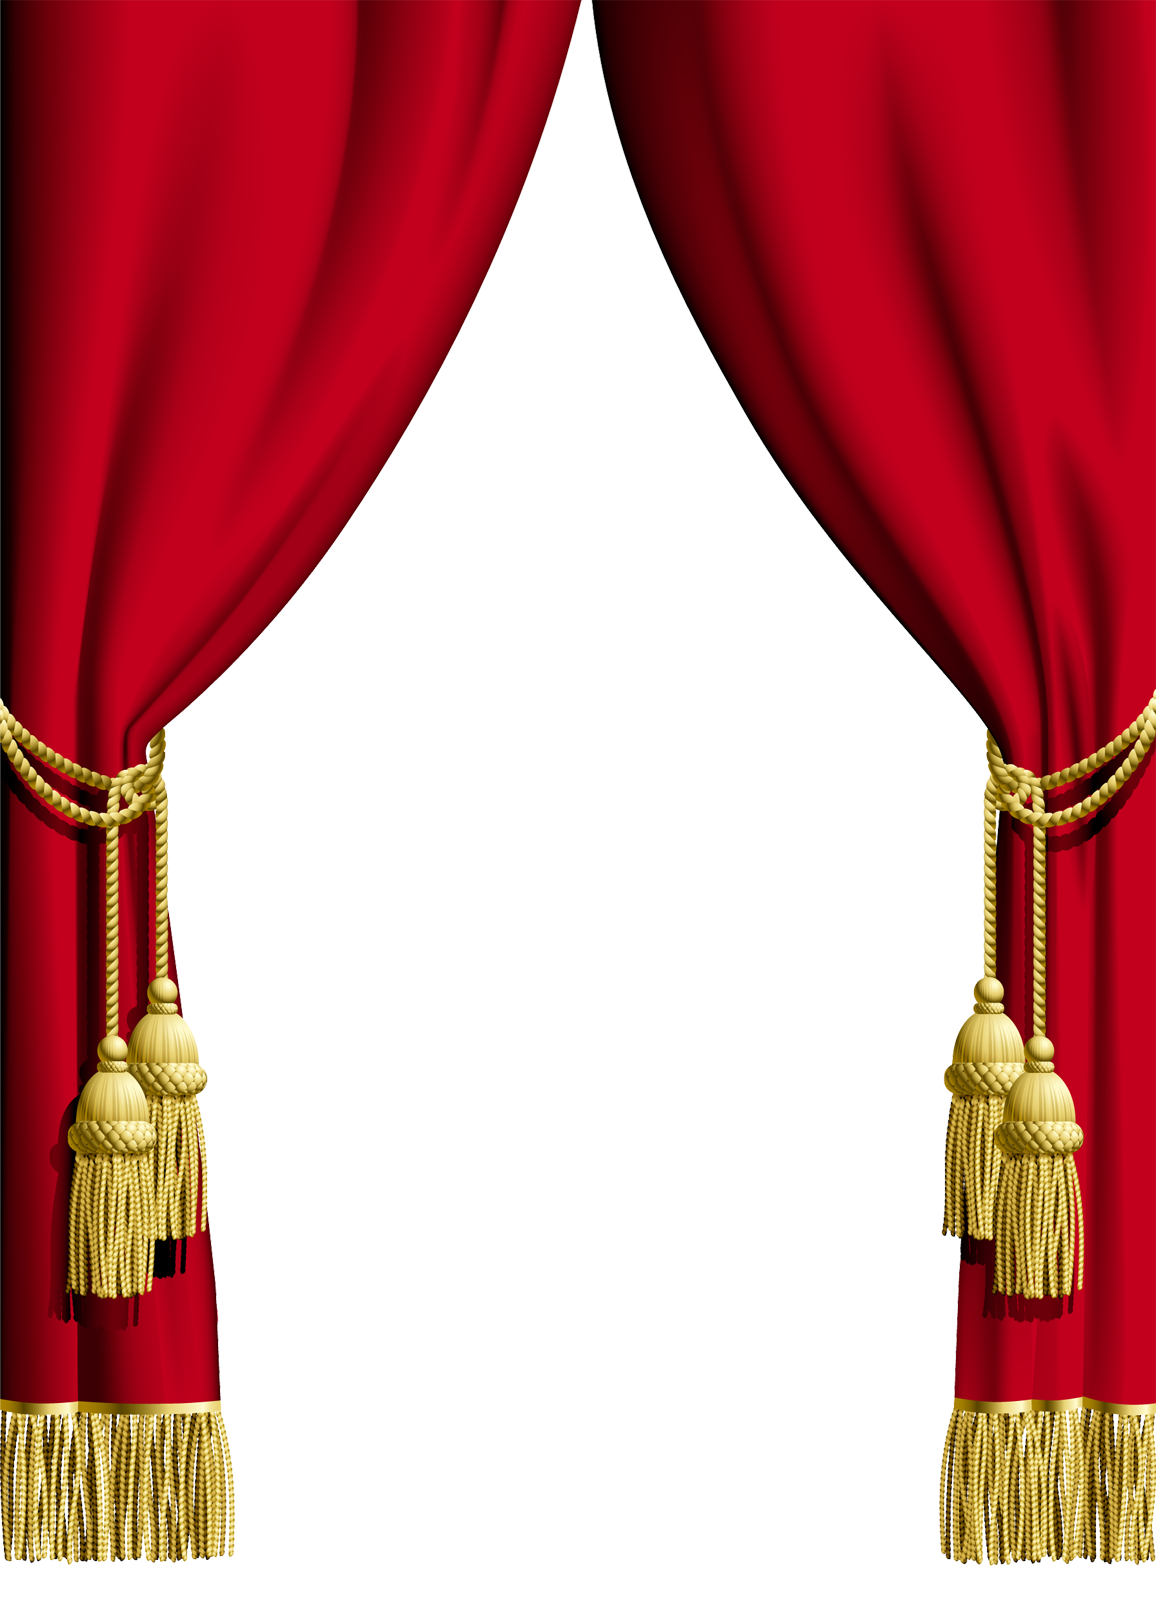 Curtains clipart side. Png images free download